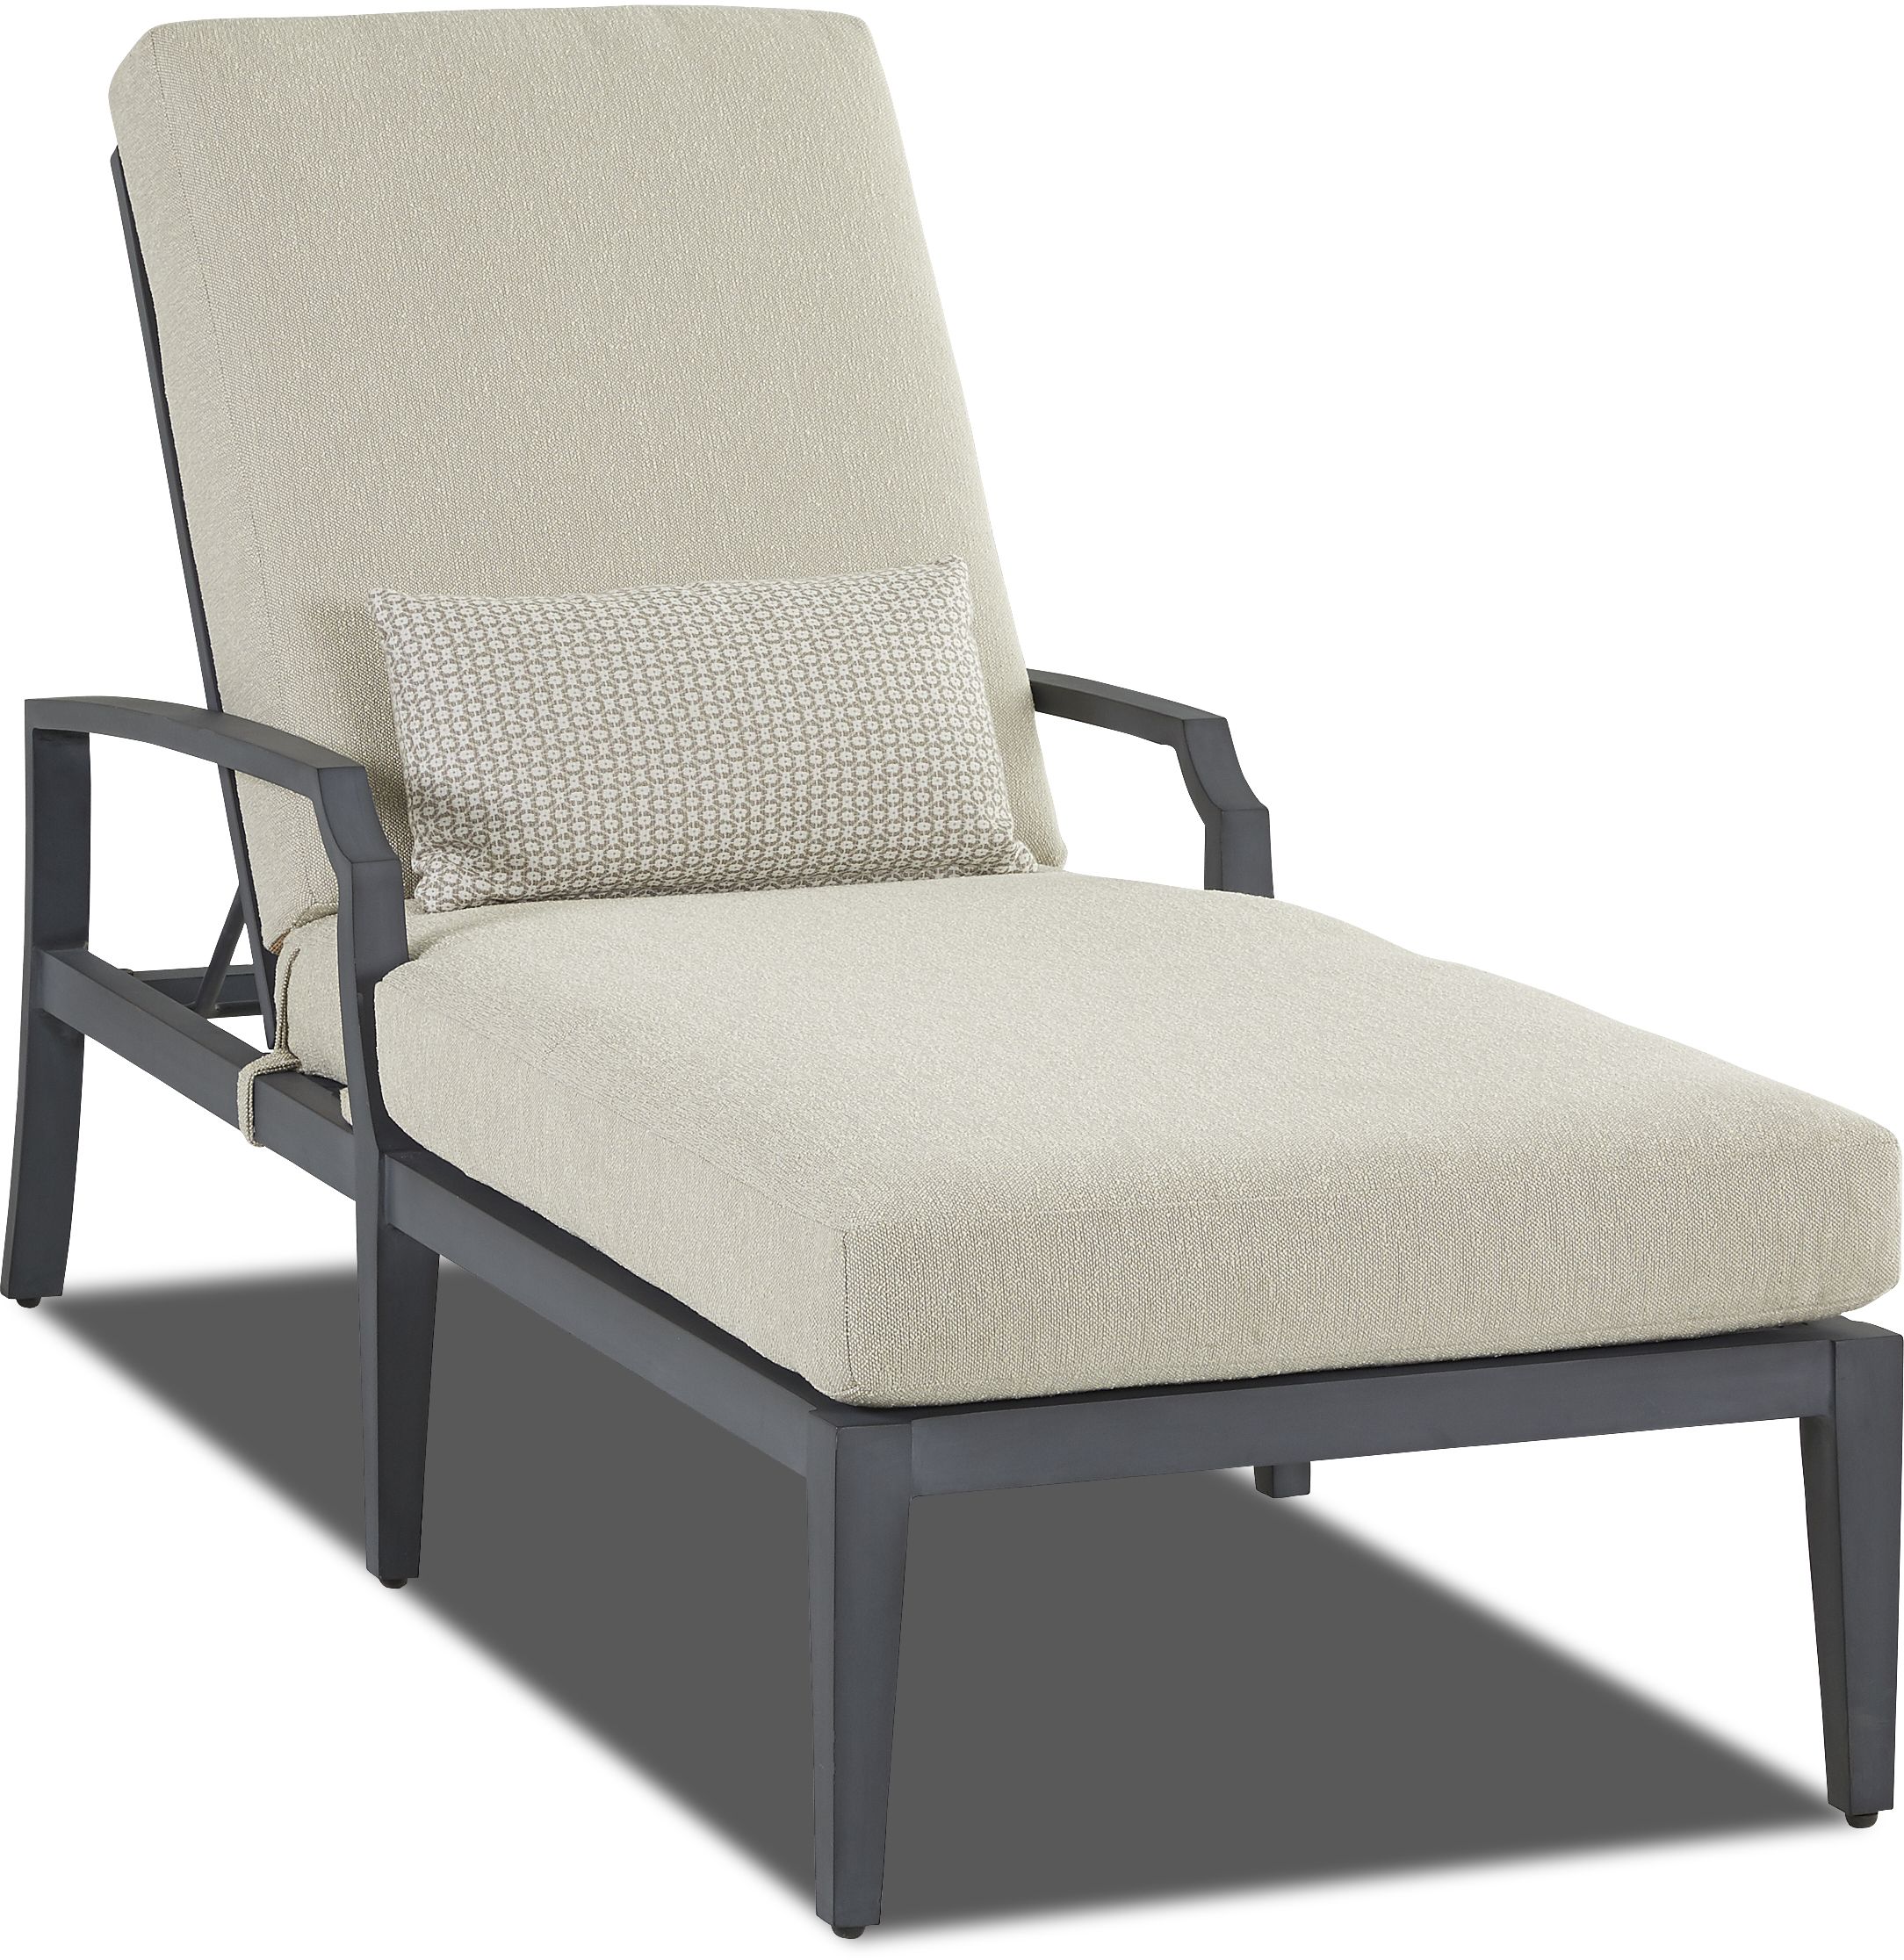 Klaussner® Outdoor Mirage Chaise